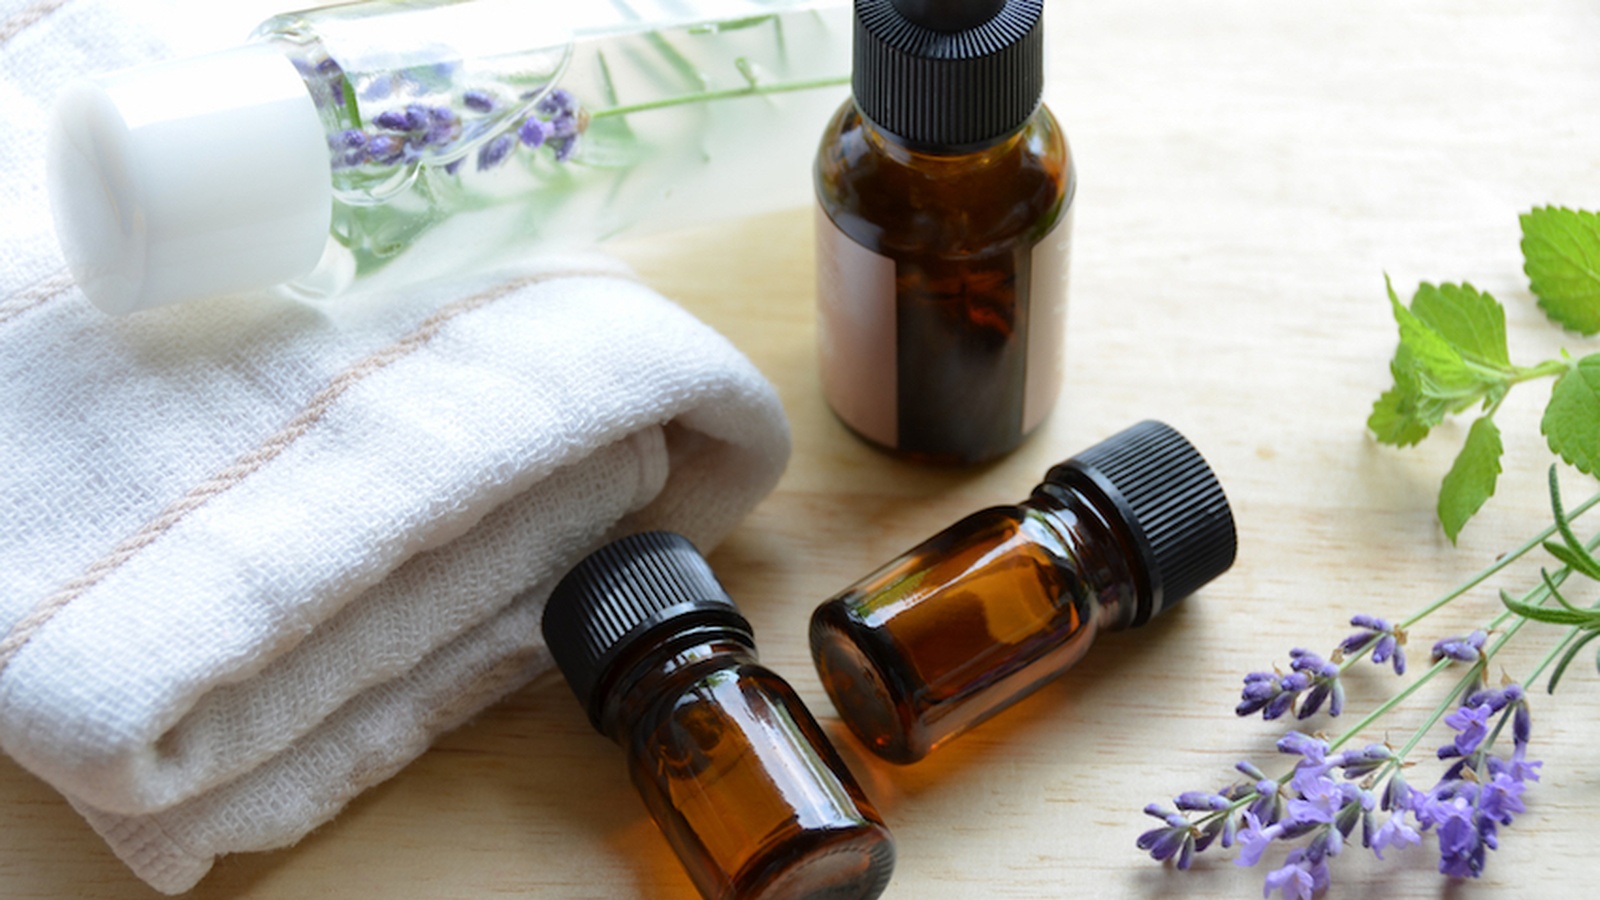 6 Healing Essential Oils For Anyone With Inflamed, Dry, Itchy, or Patchy Skin